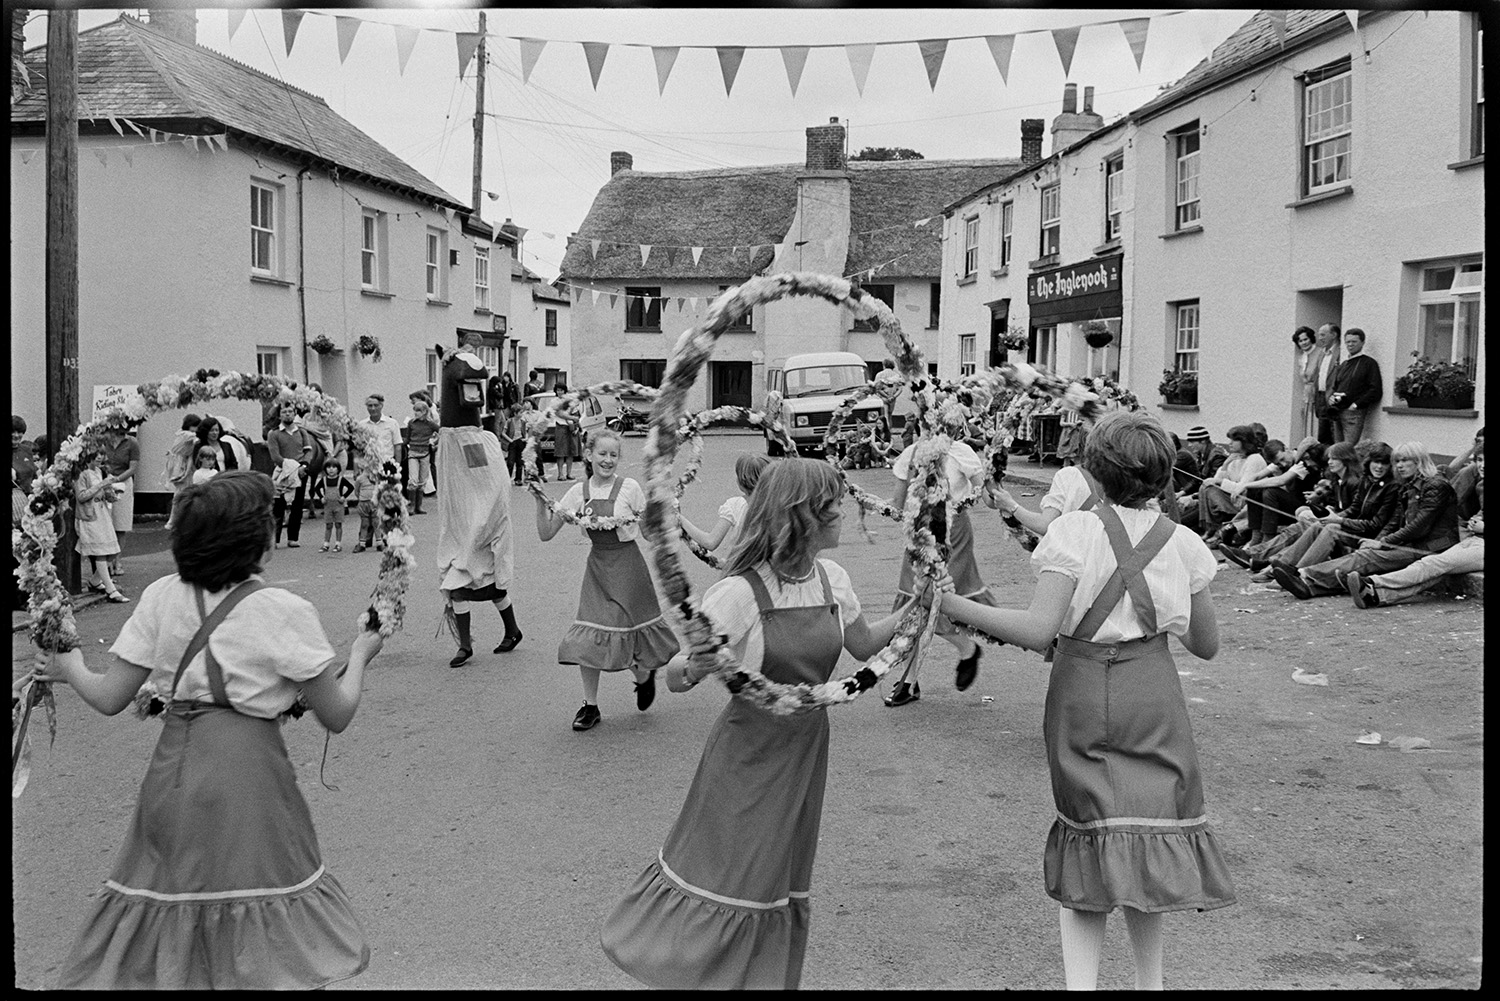 Village Fair, folk clog dancing. Fancy dress, spectators. 
[A group of girl Morris Dancers or Clog Dancers performing with floral garlands at Winkleigh Fair. People are gathered around Winkleigh Square, which is decorated with bunting, watching them. A person wearing a horse's head costume is with them.]